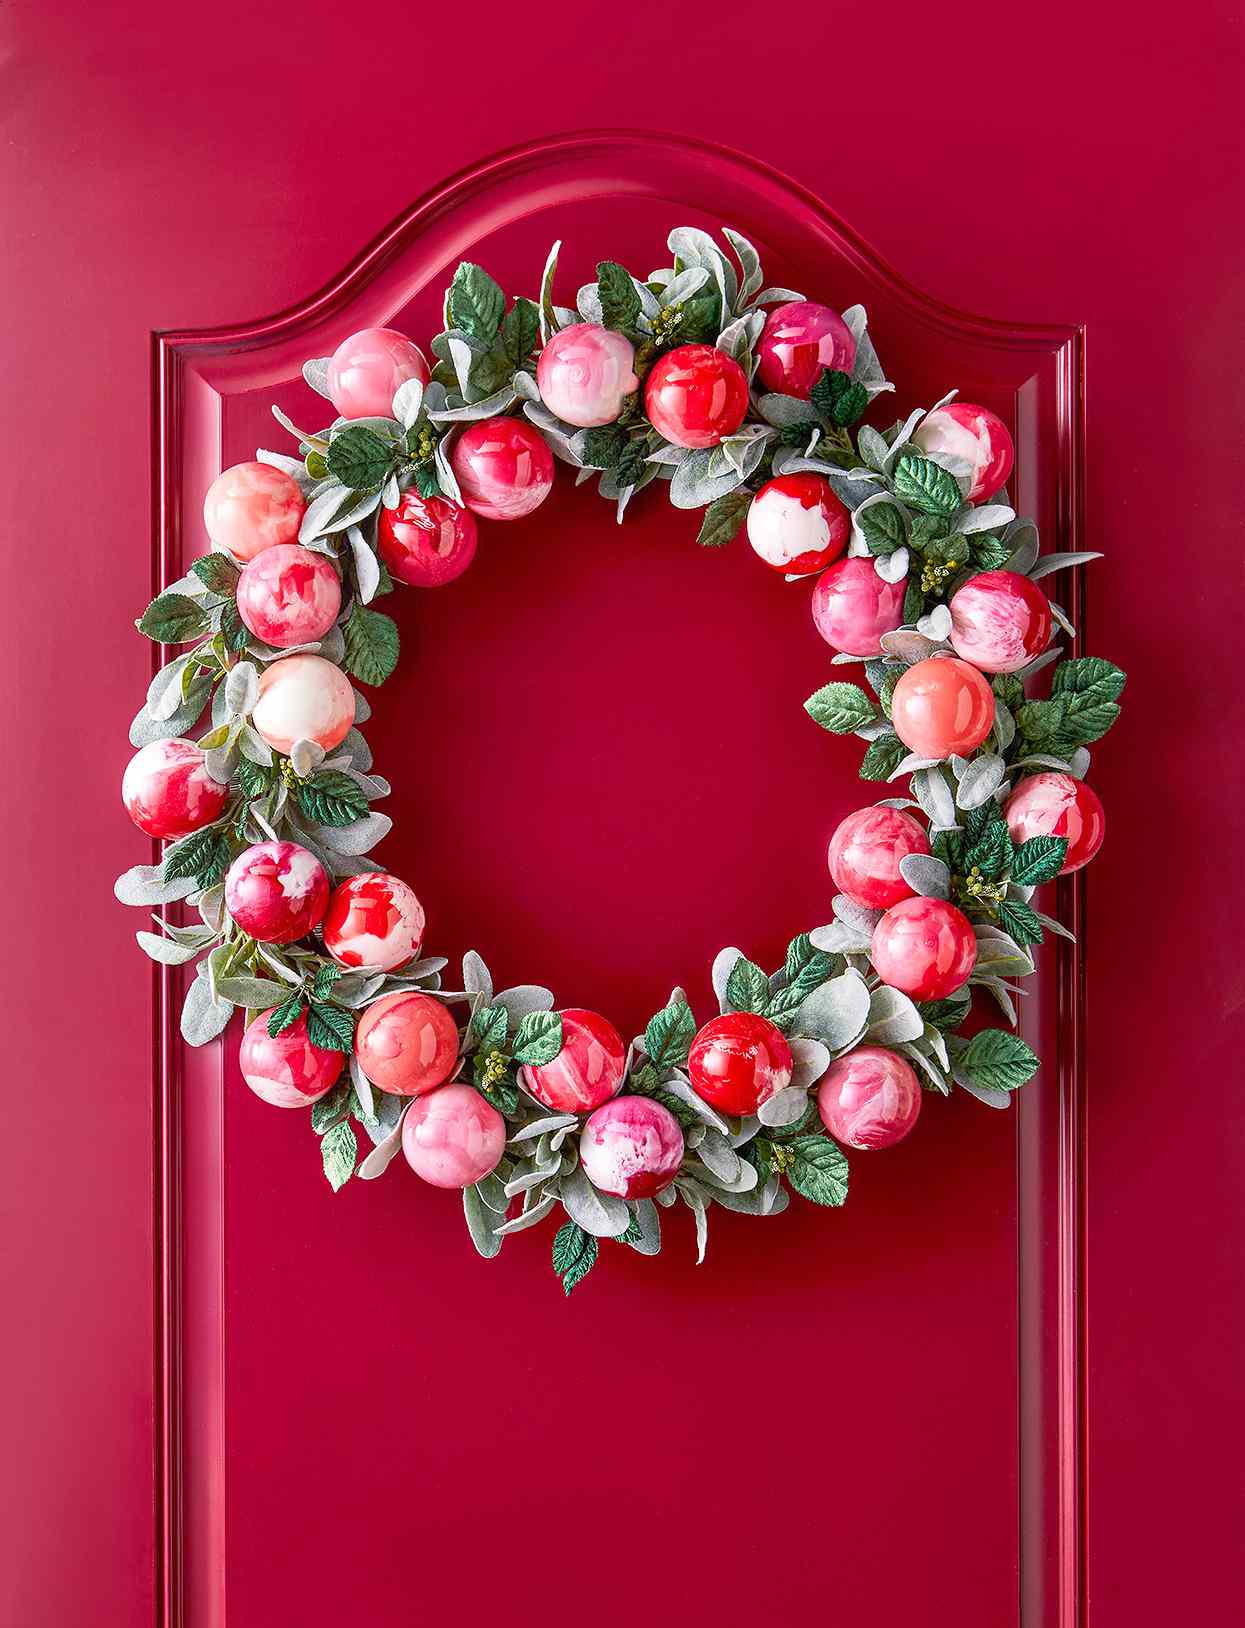 red door with red ornaments and greenery